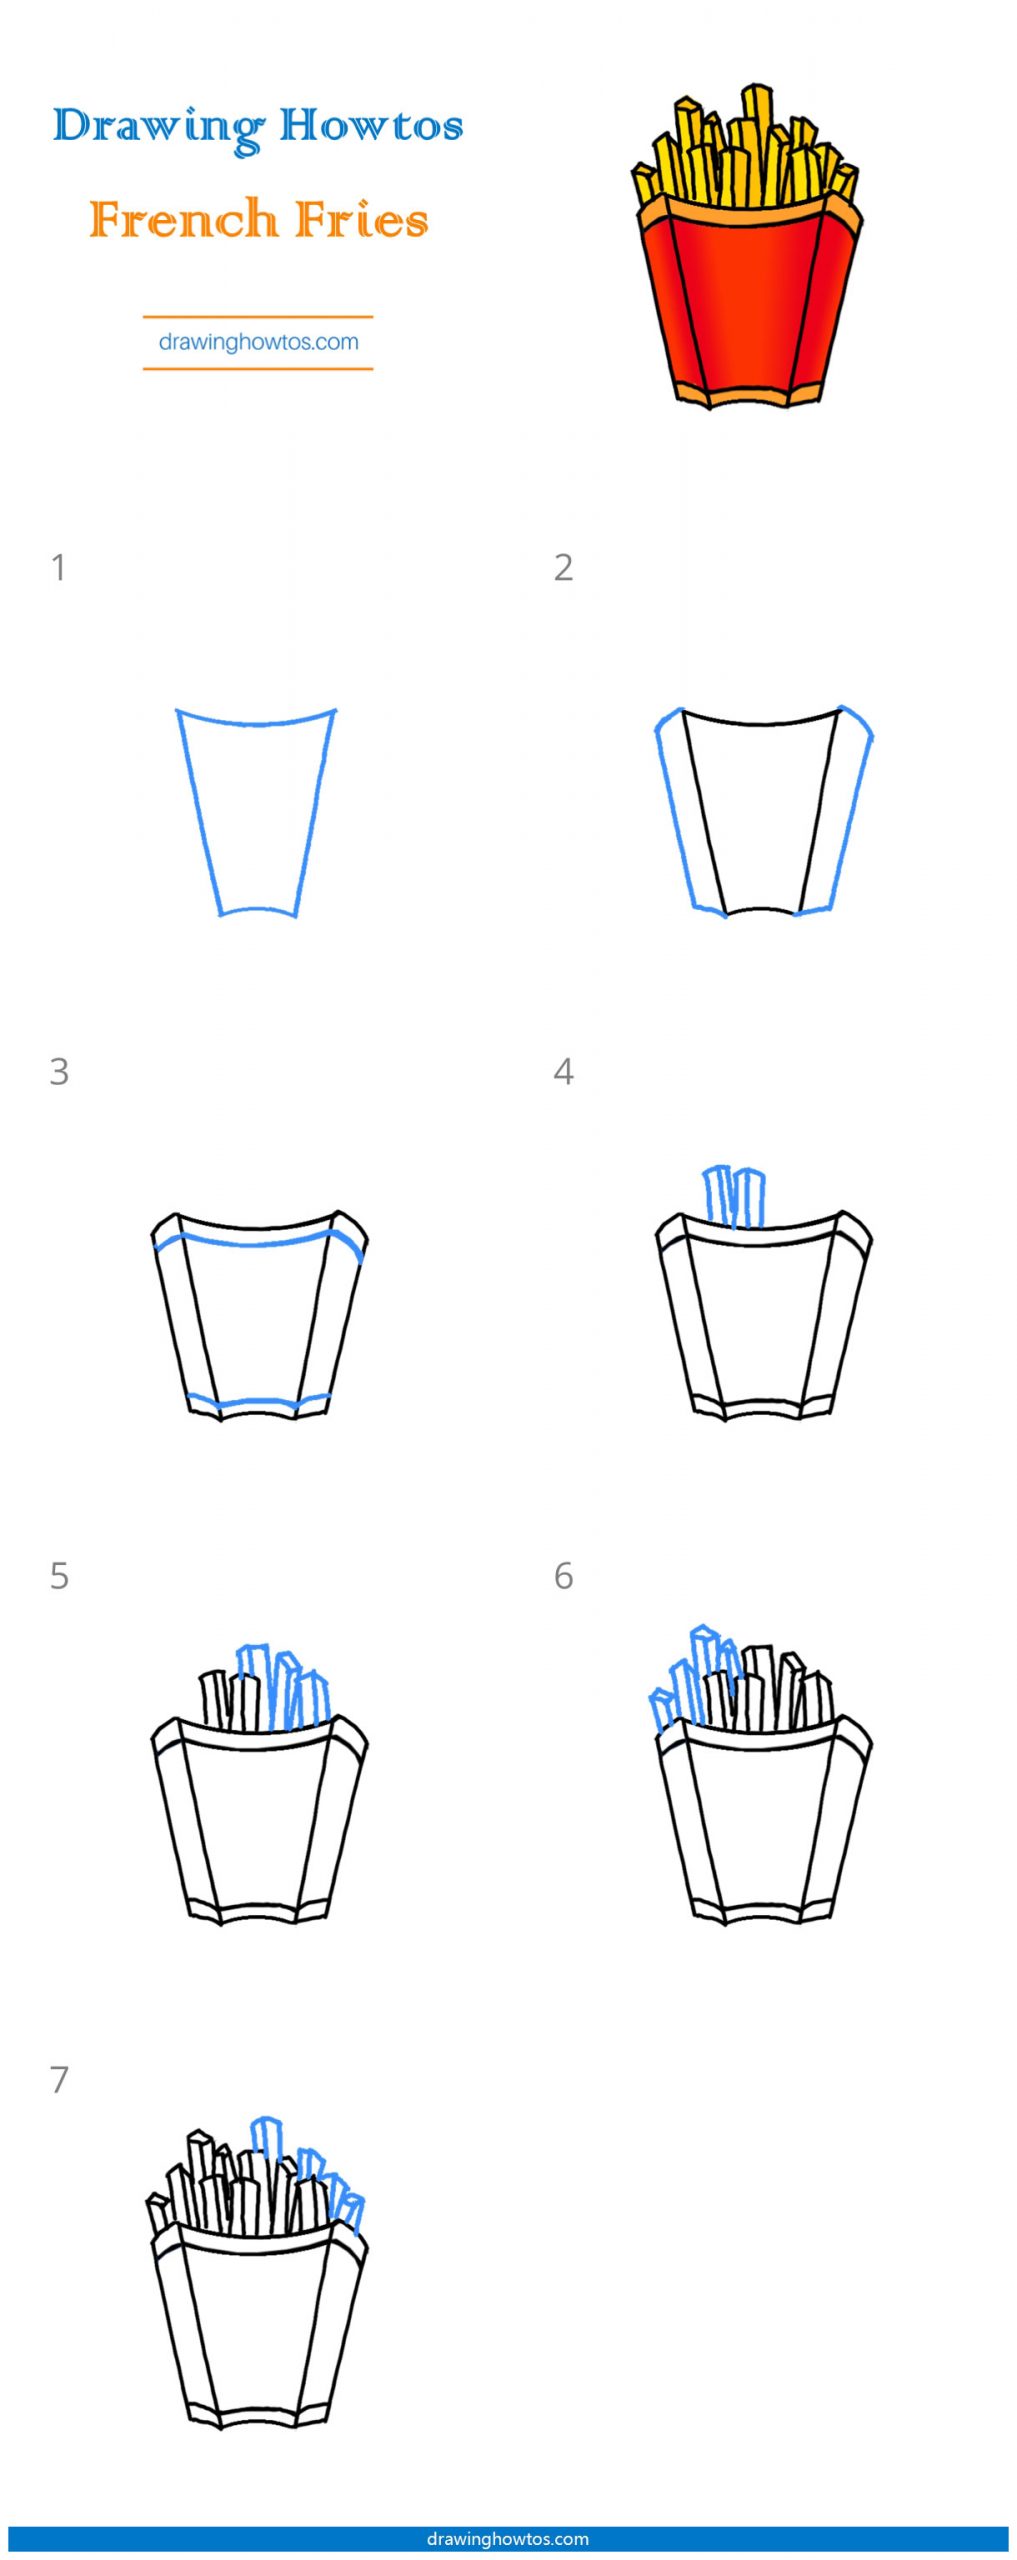 How to Draw French Fries Step by Step